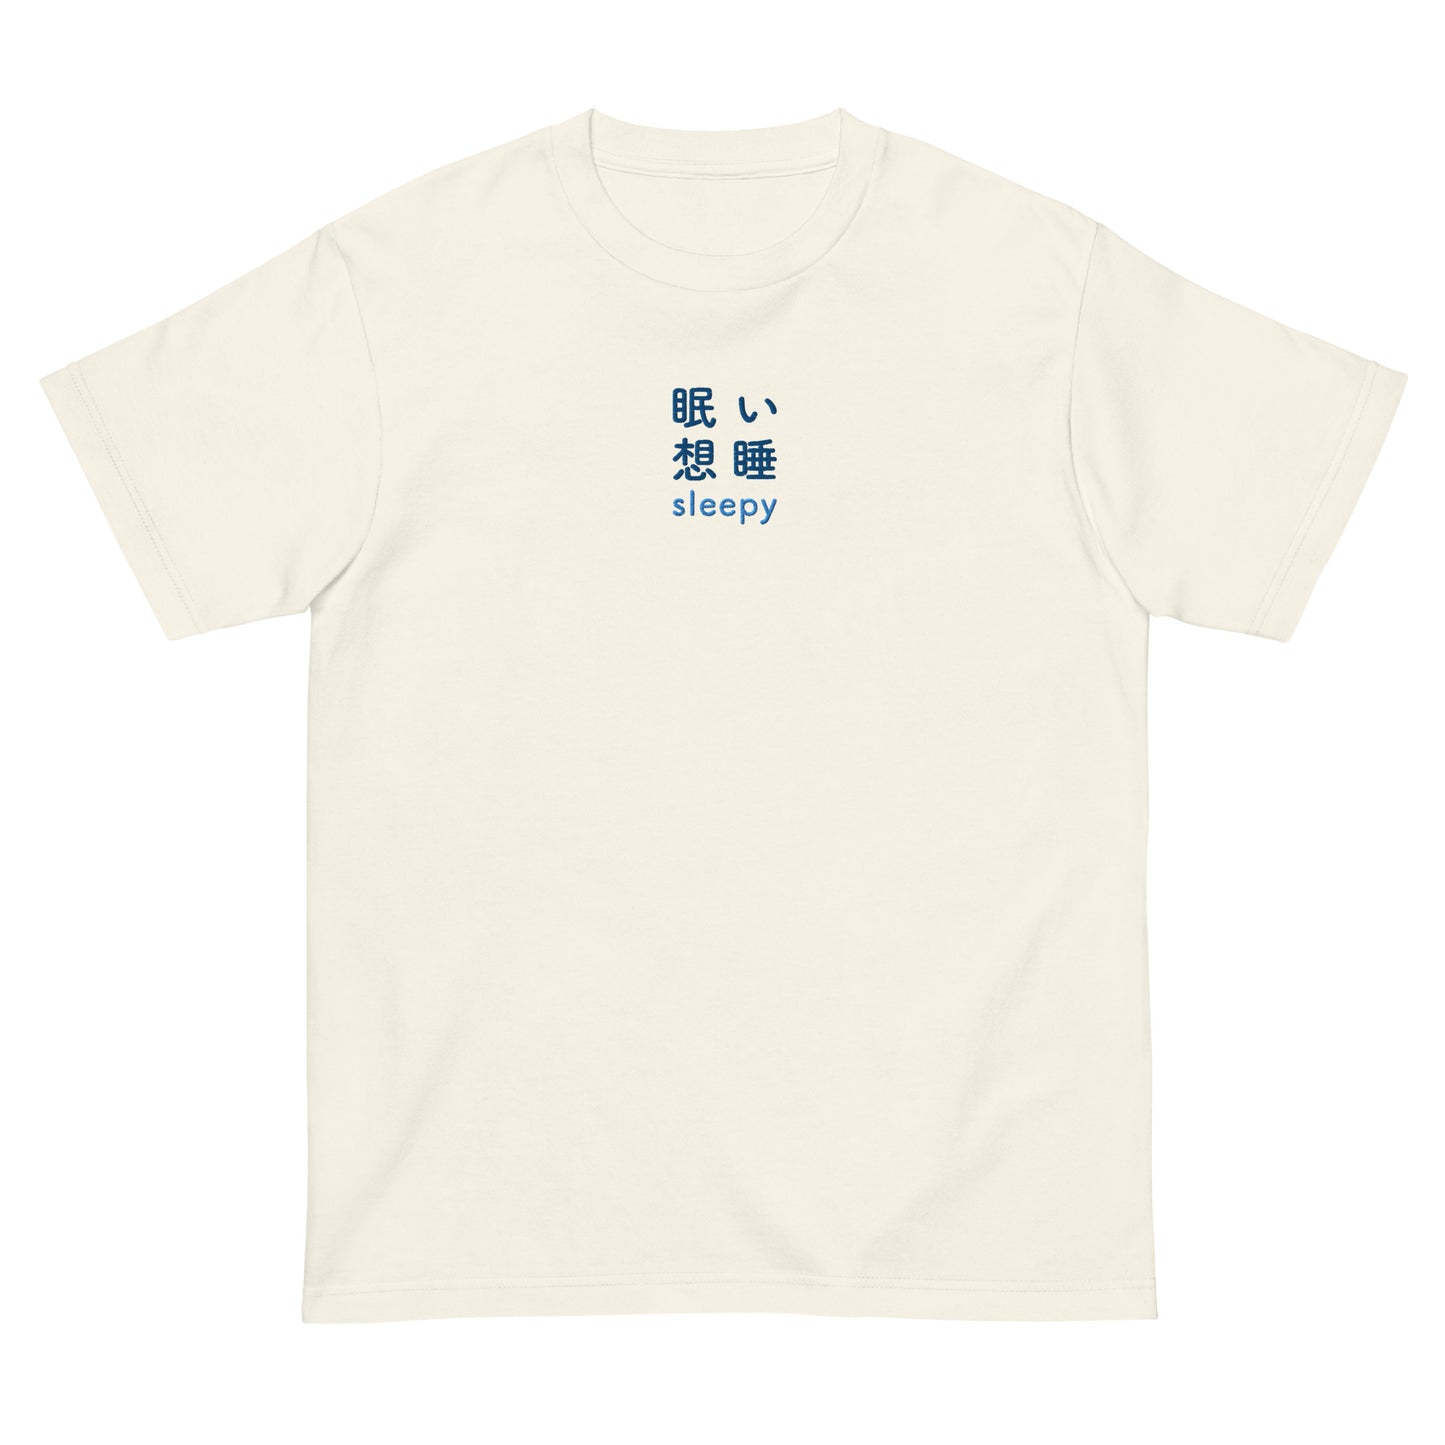 Ivory High Quality Tee - Front Design with an Blue Embroidery "Sleepy" in Japanese,Chinese and English